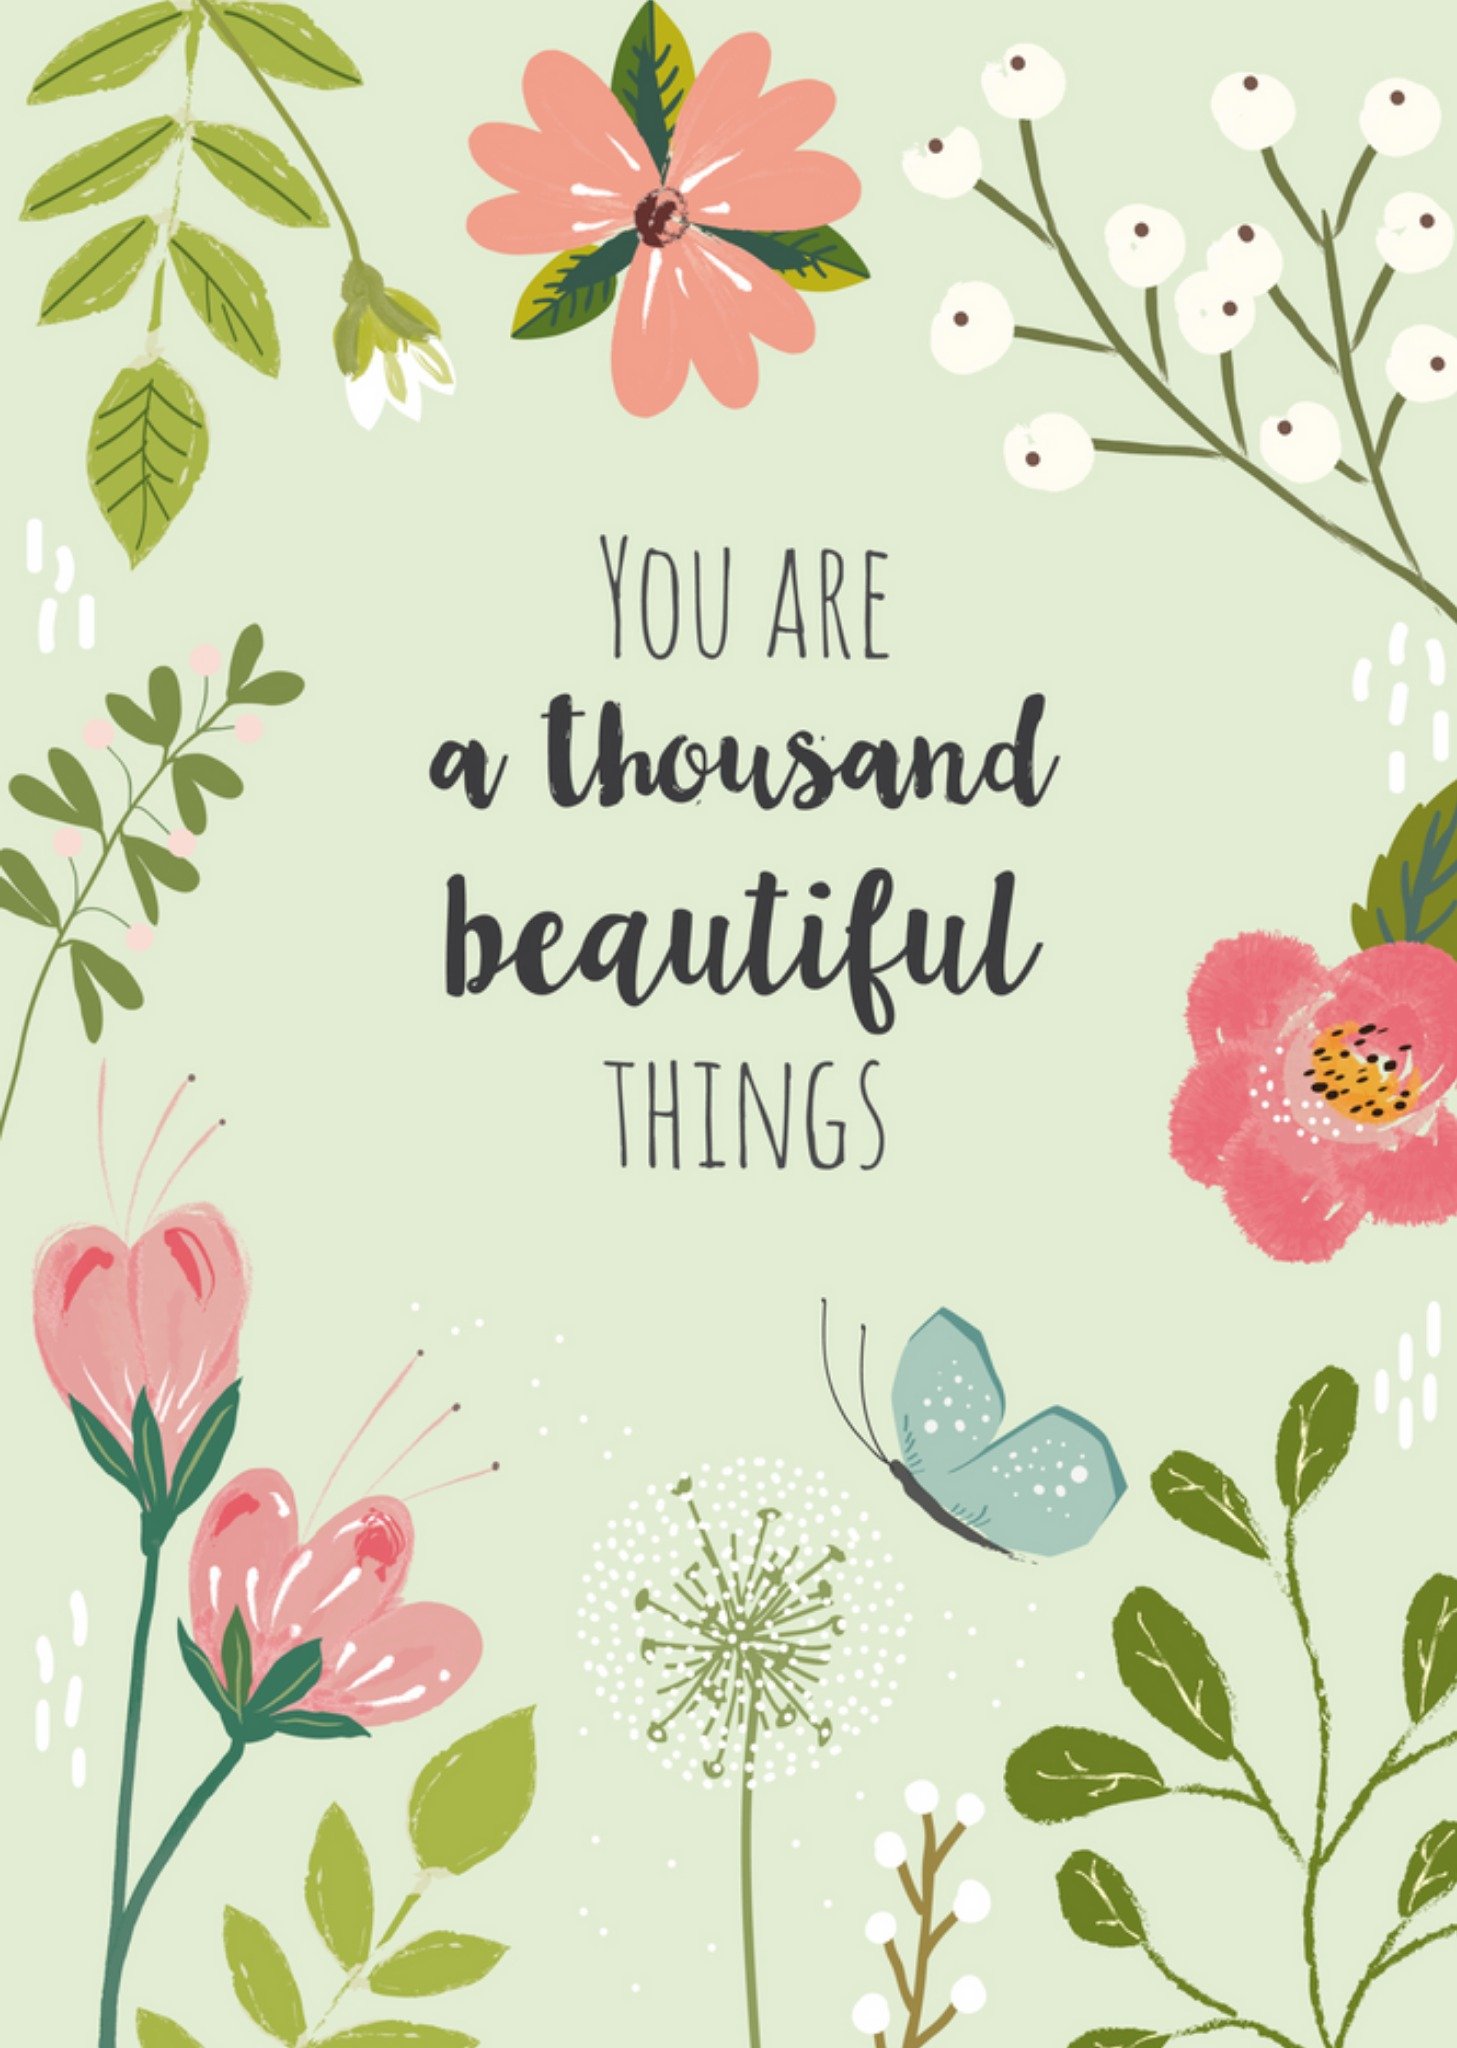 You are a thousand beautiful things